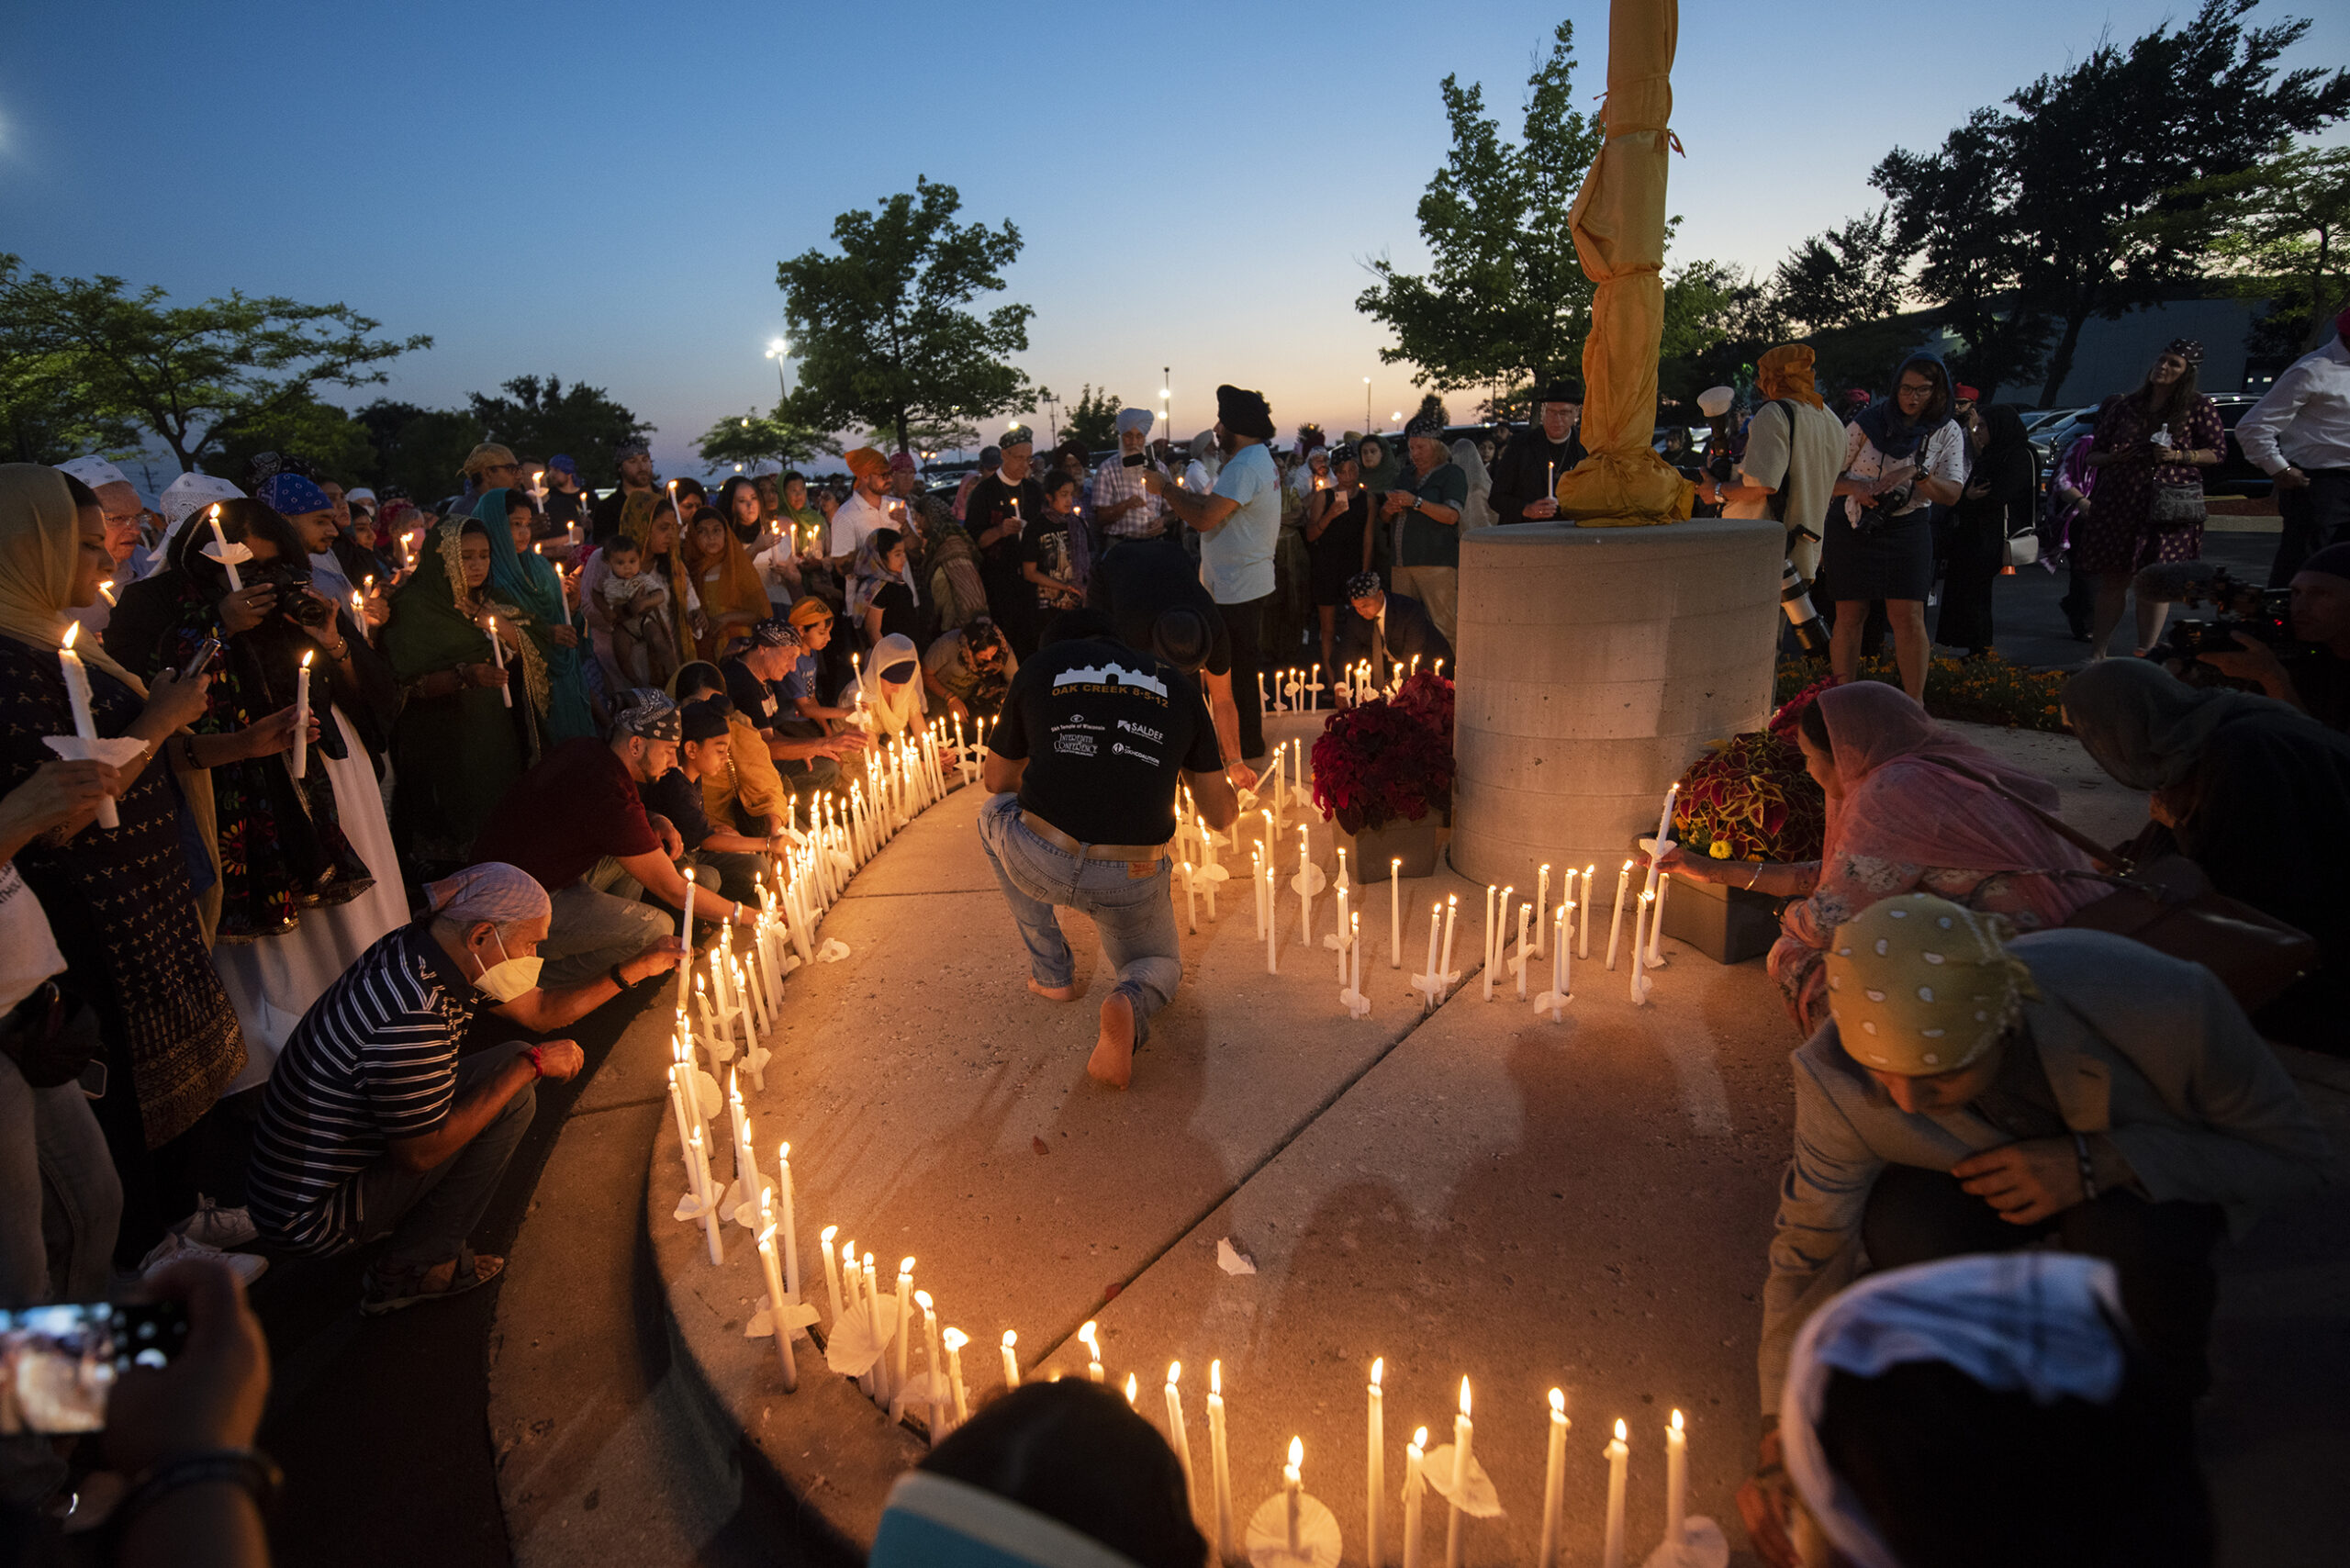 Candles are placed in a circle as people gather around.